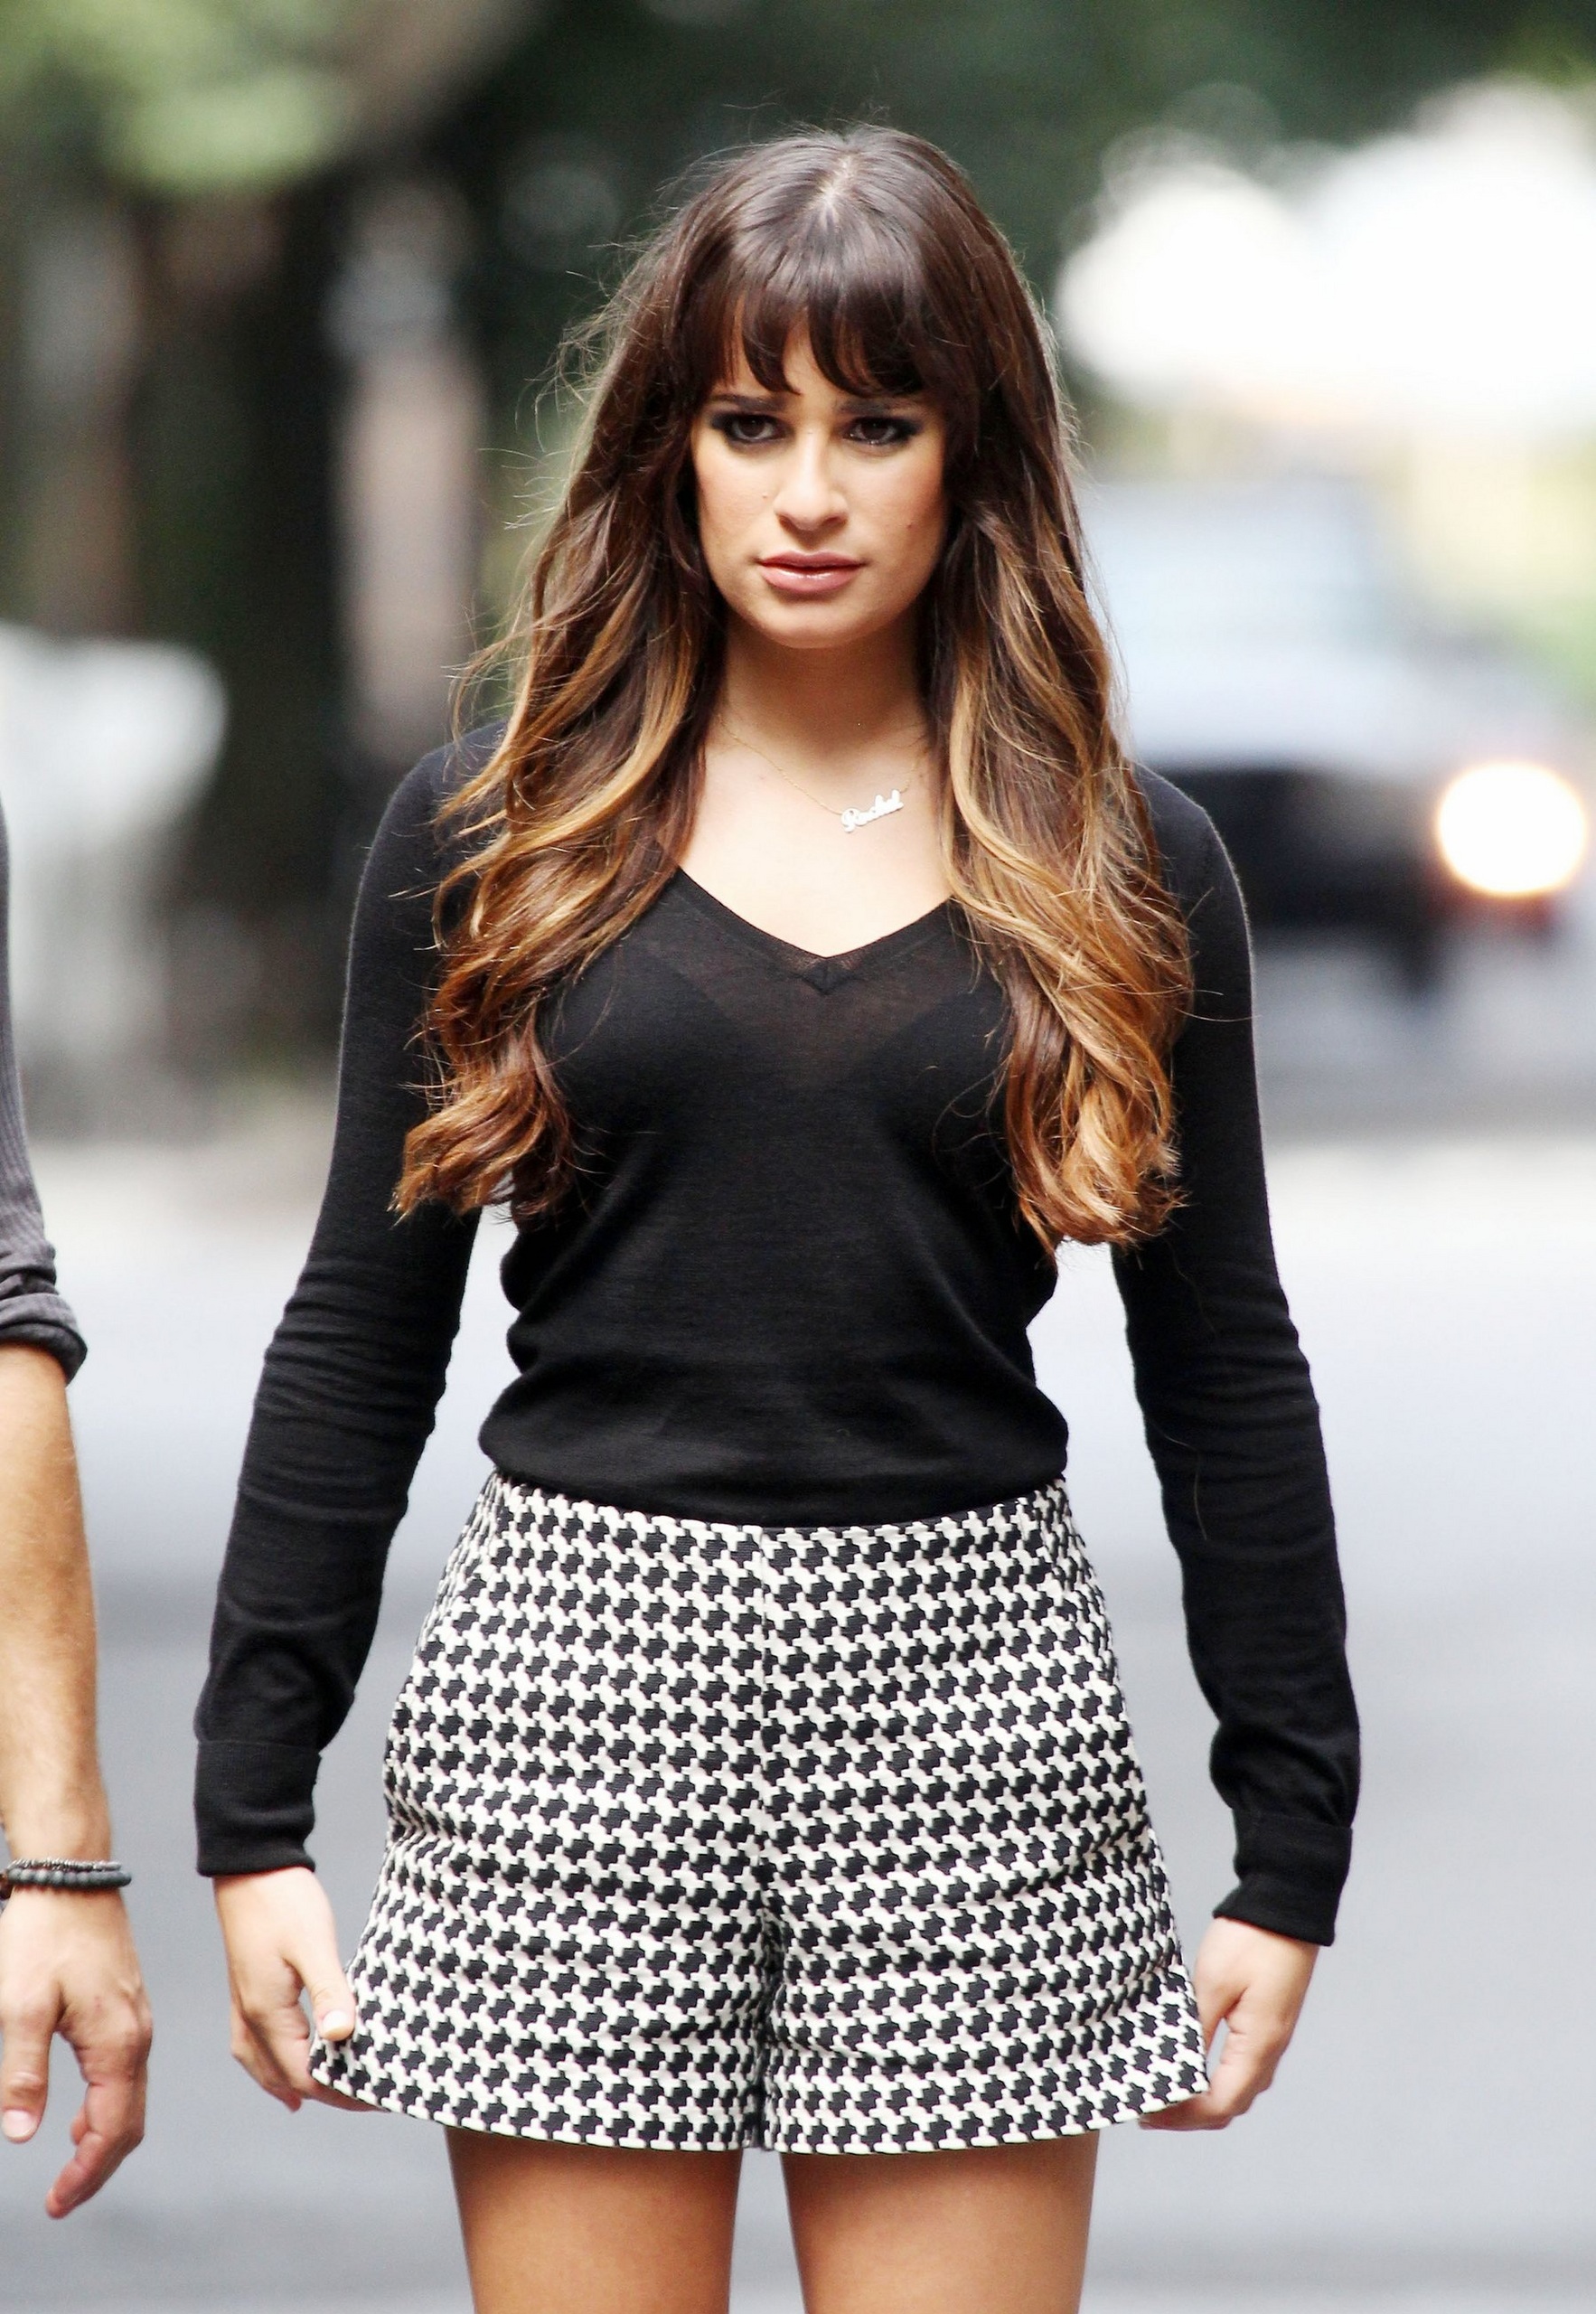 Name Lea Michele HD Wallpaper Pictures